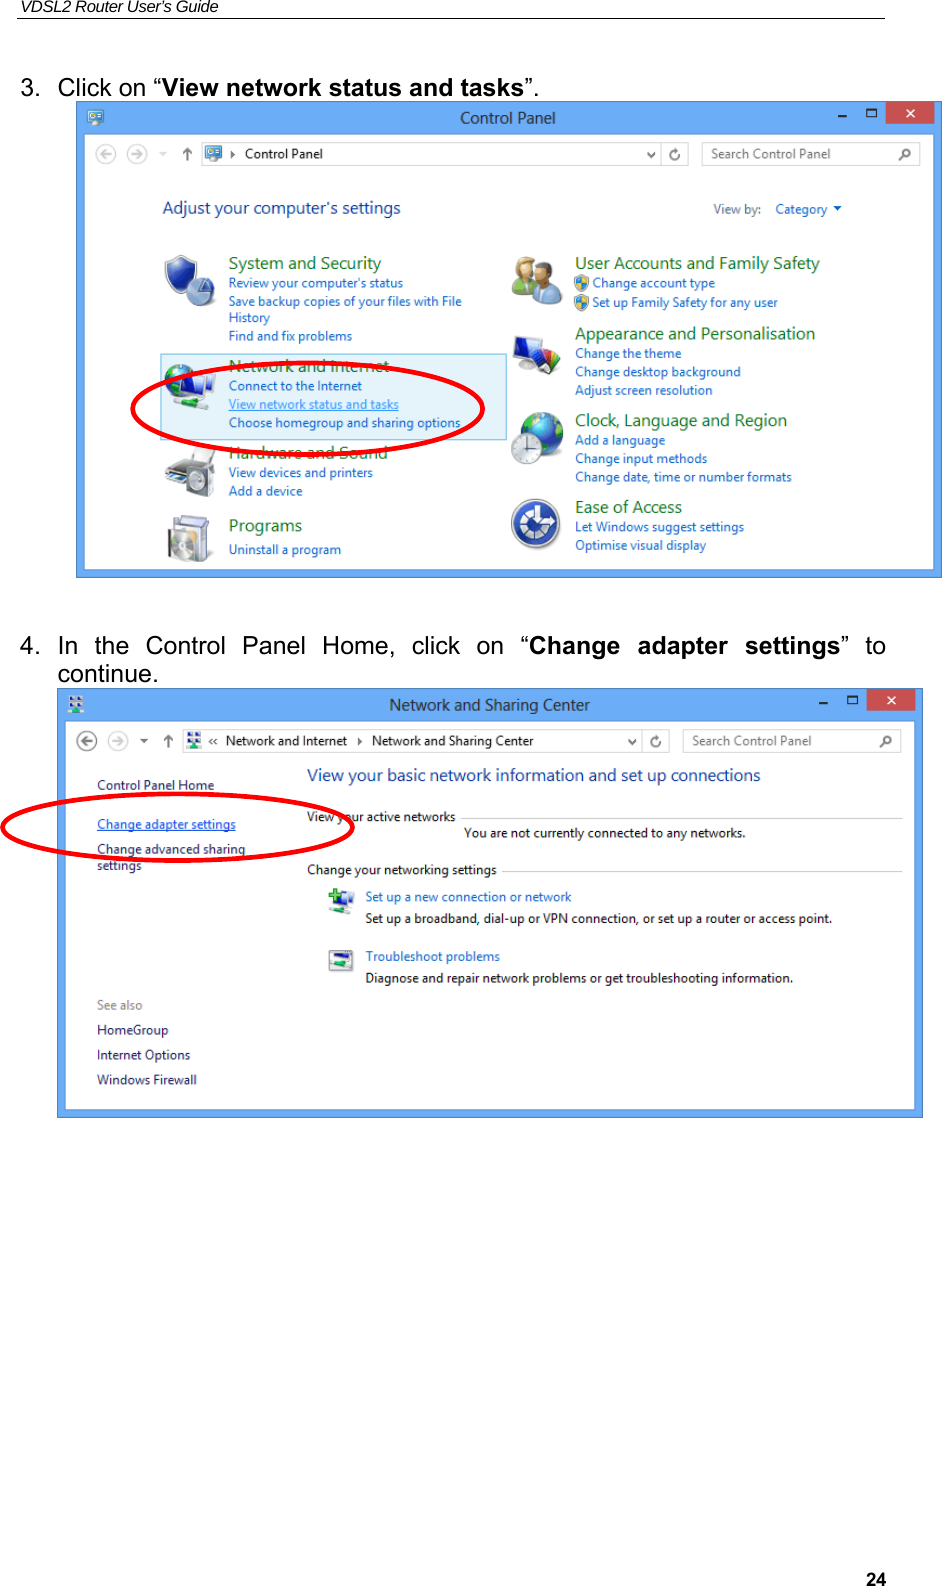 VDSL2 Router User’s Guide     243.  Click on “View network status and tasks”.   4.  In  the  Control  Panel  Home,  click  on  “Change  adapter  settings”  to continue.           